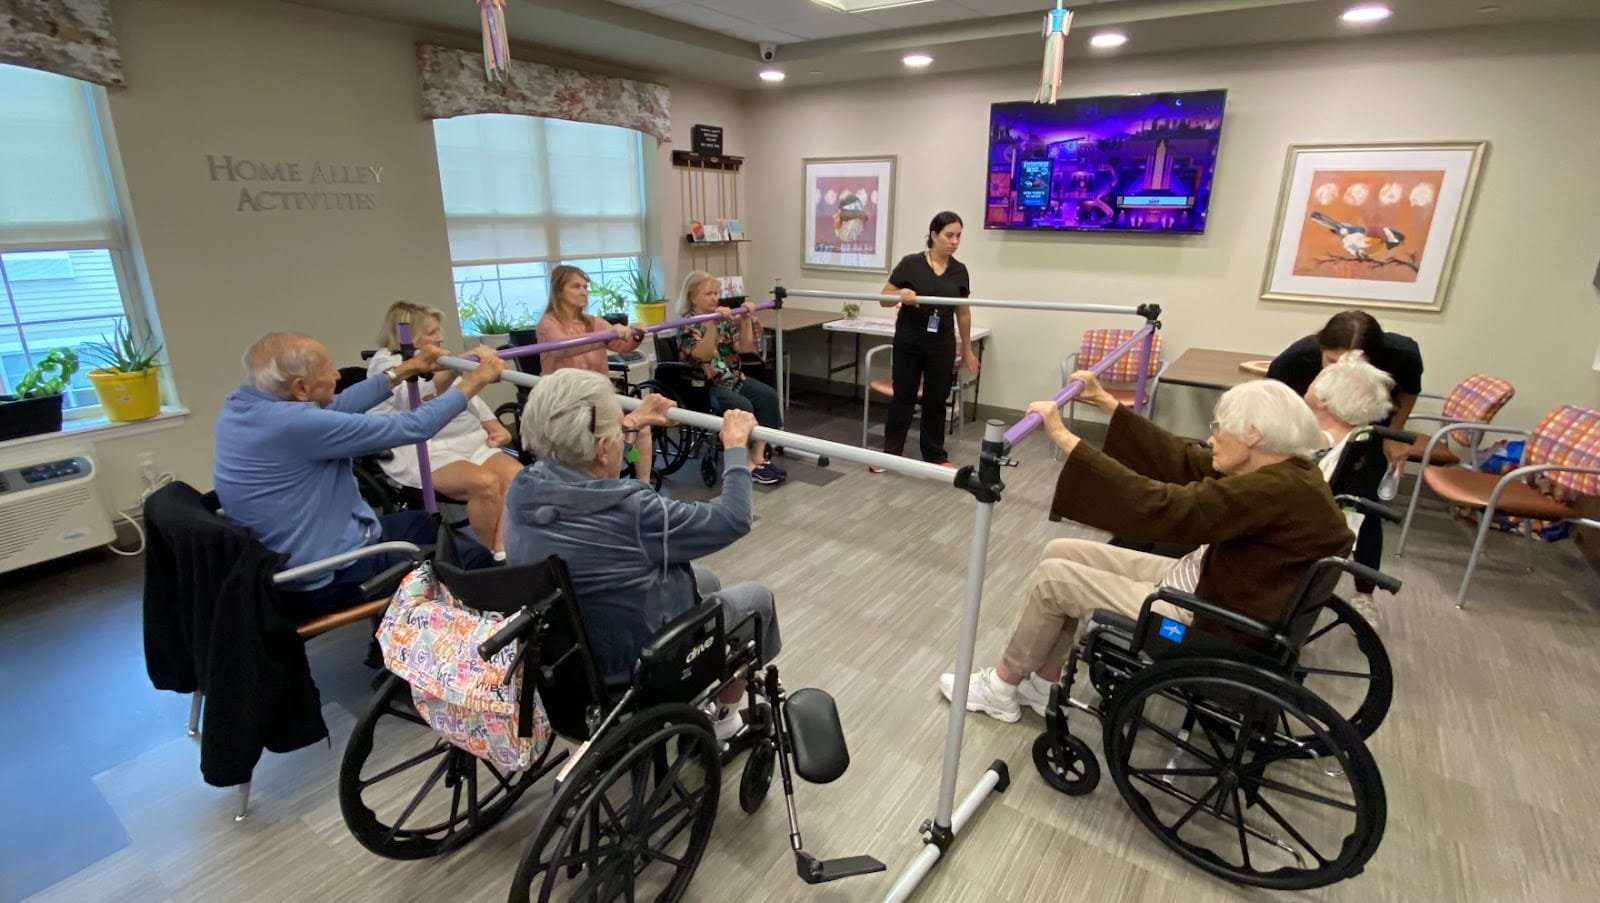 Assisted living residents receiving therapy in an activity room